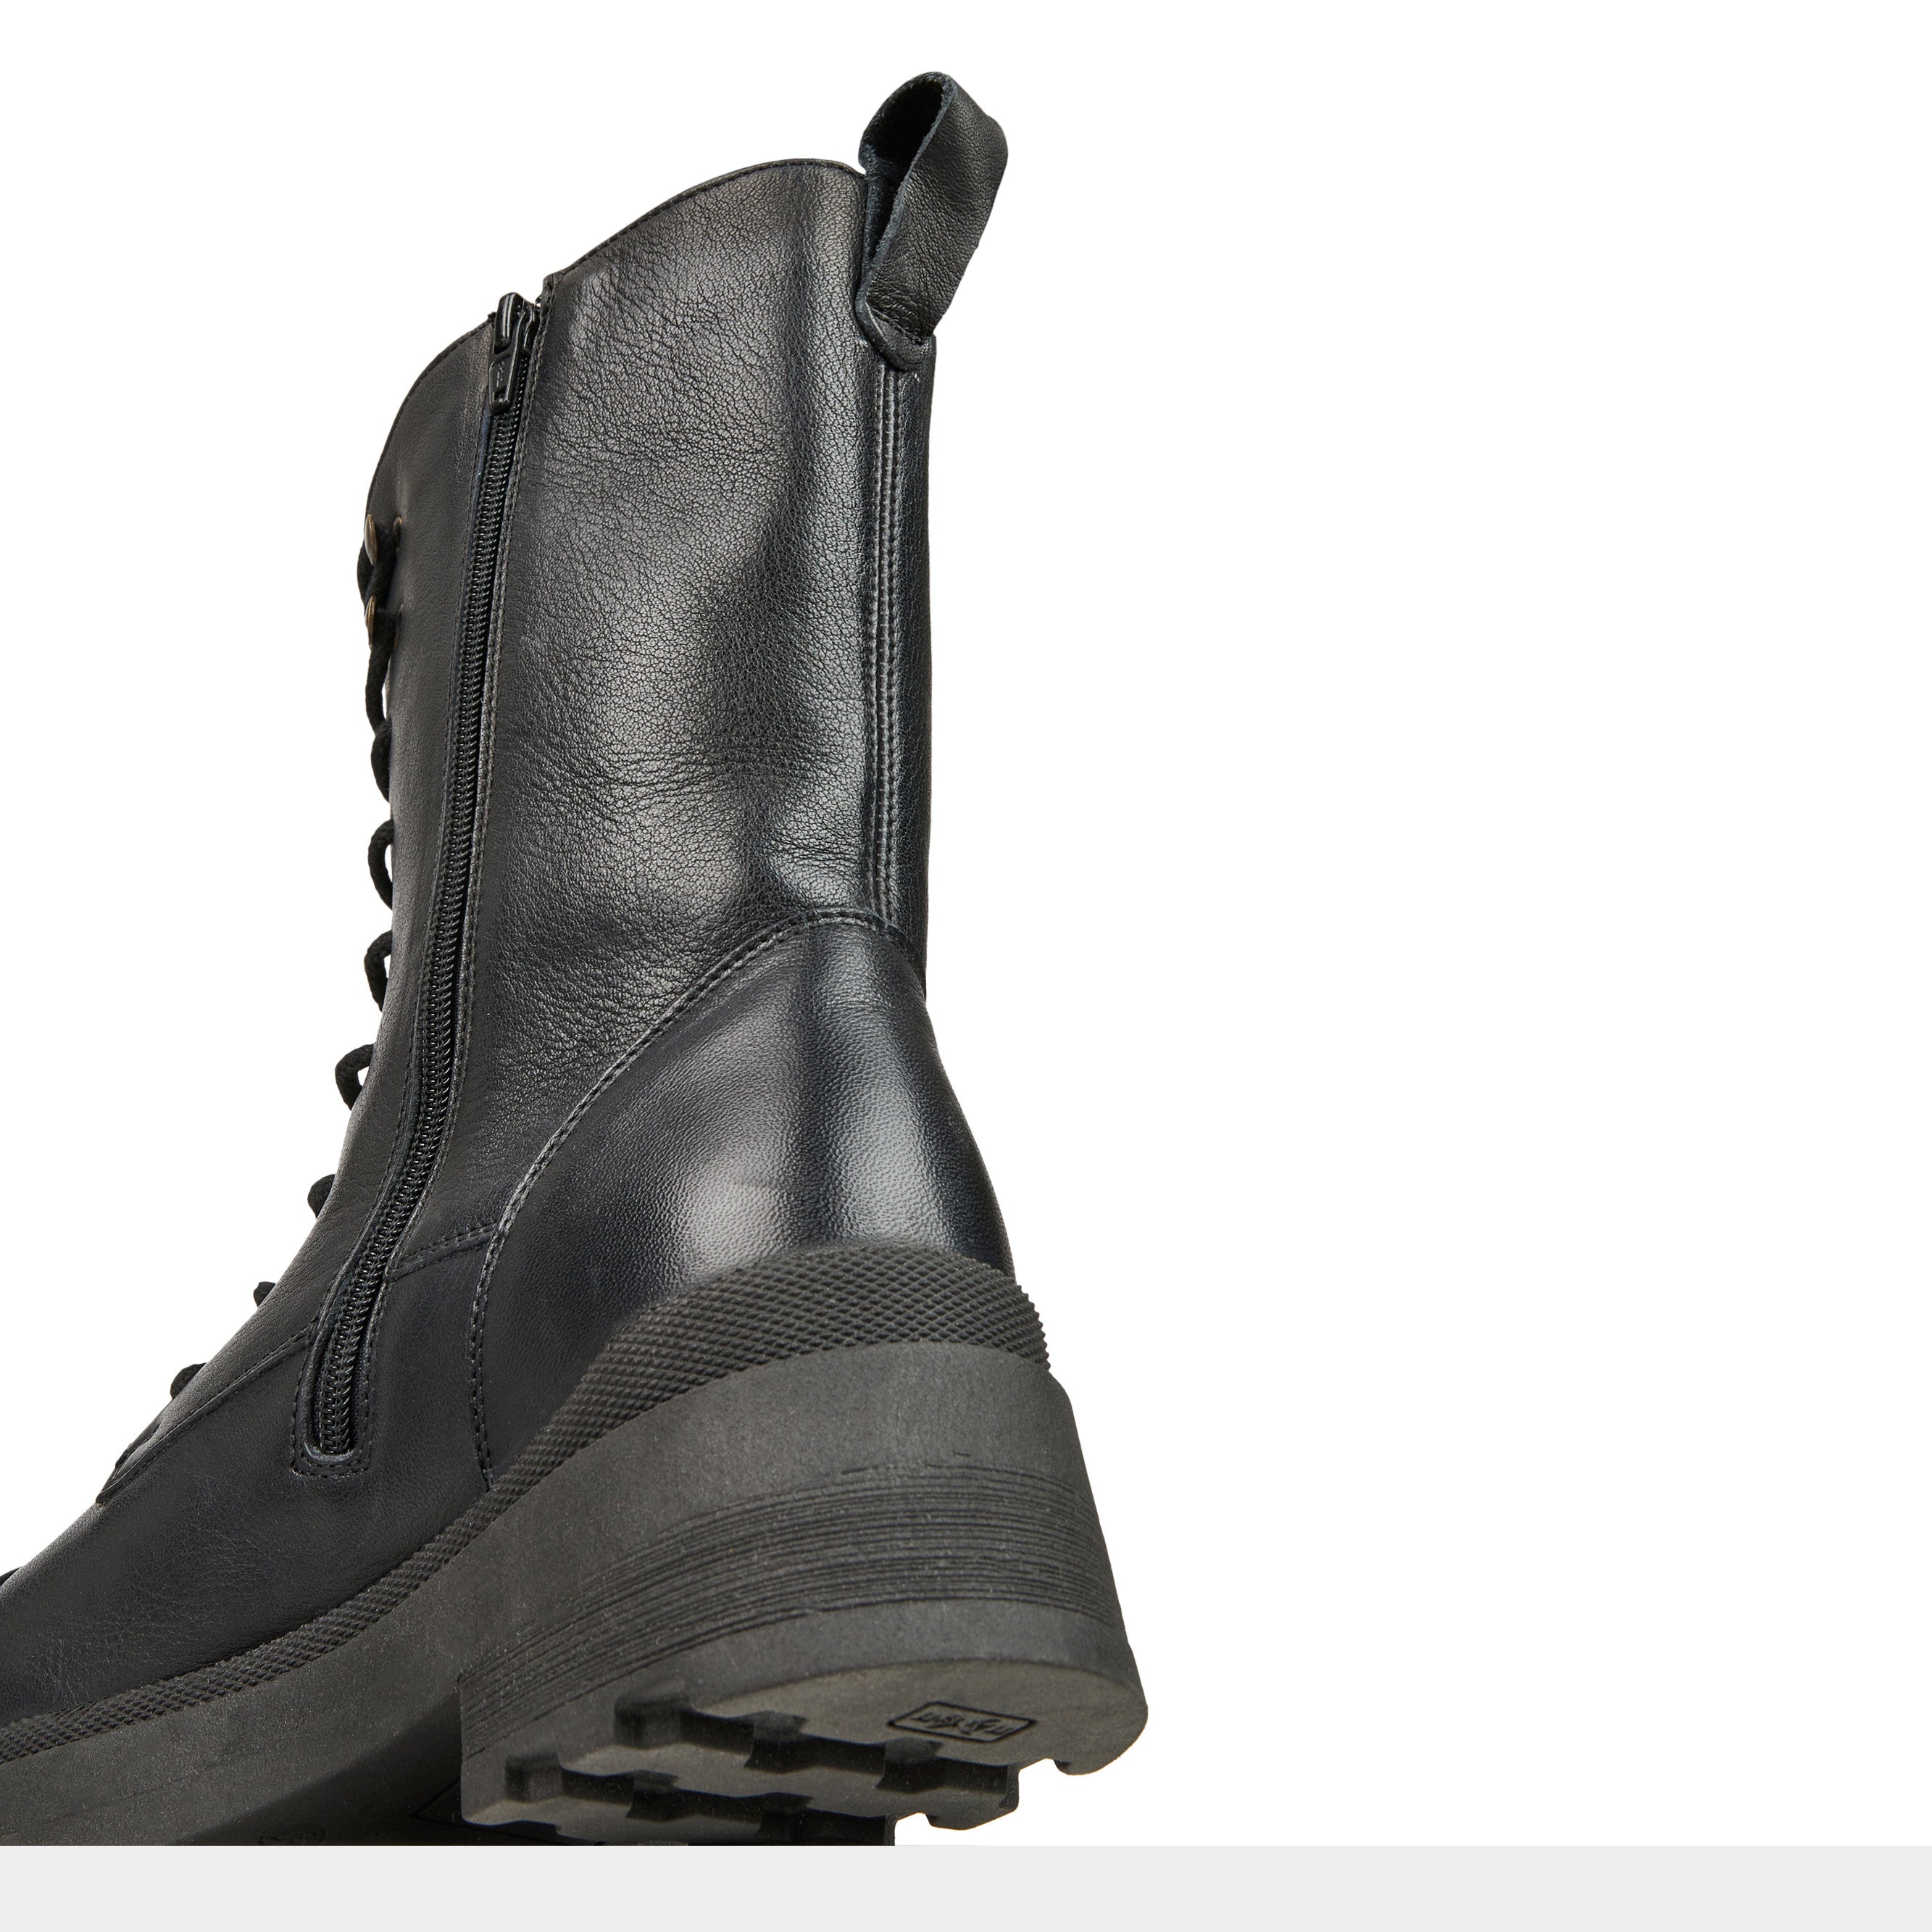 ADDITION Boots "COMBAT BOOT" - black